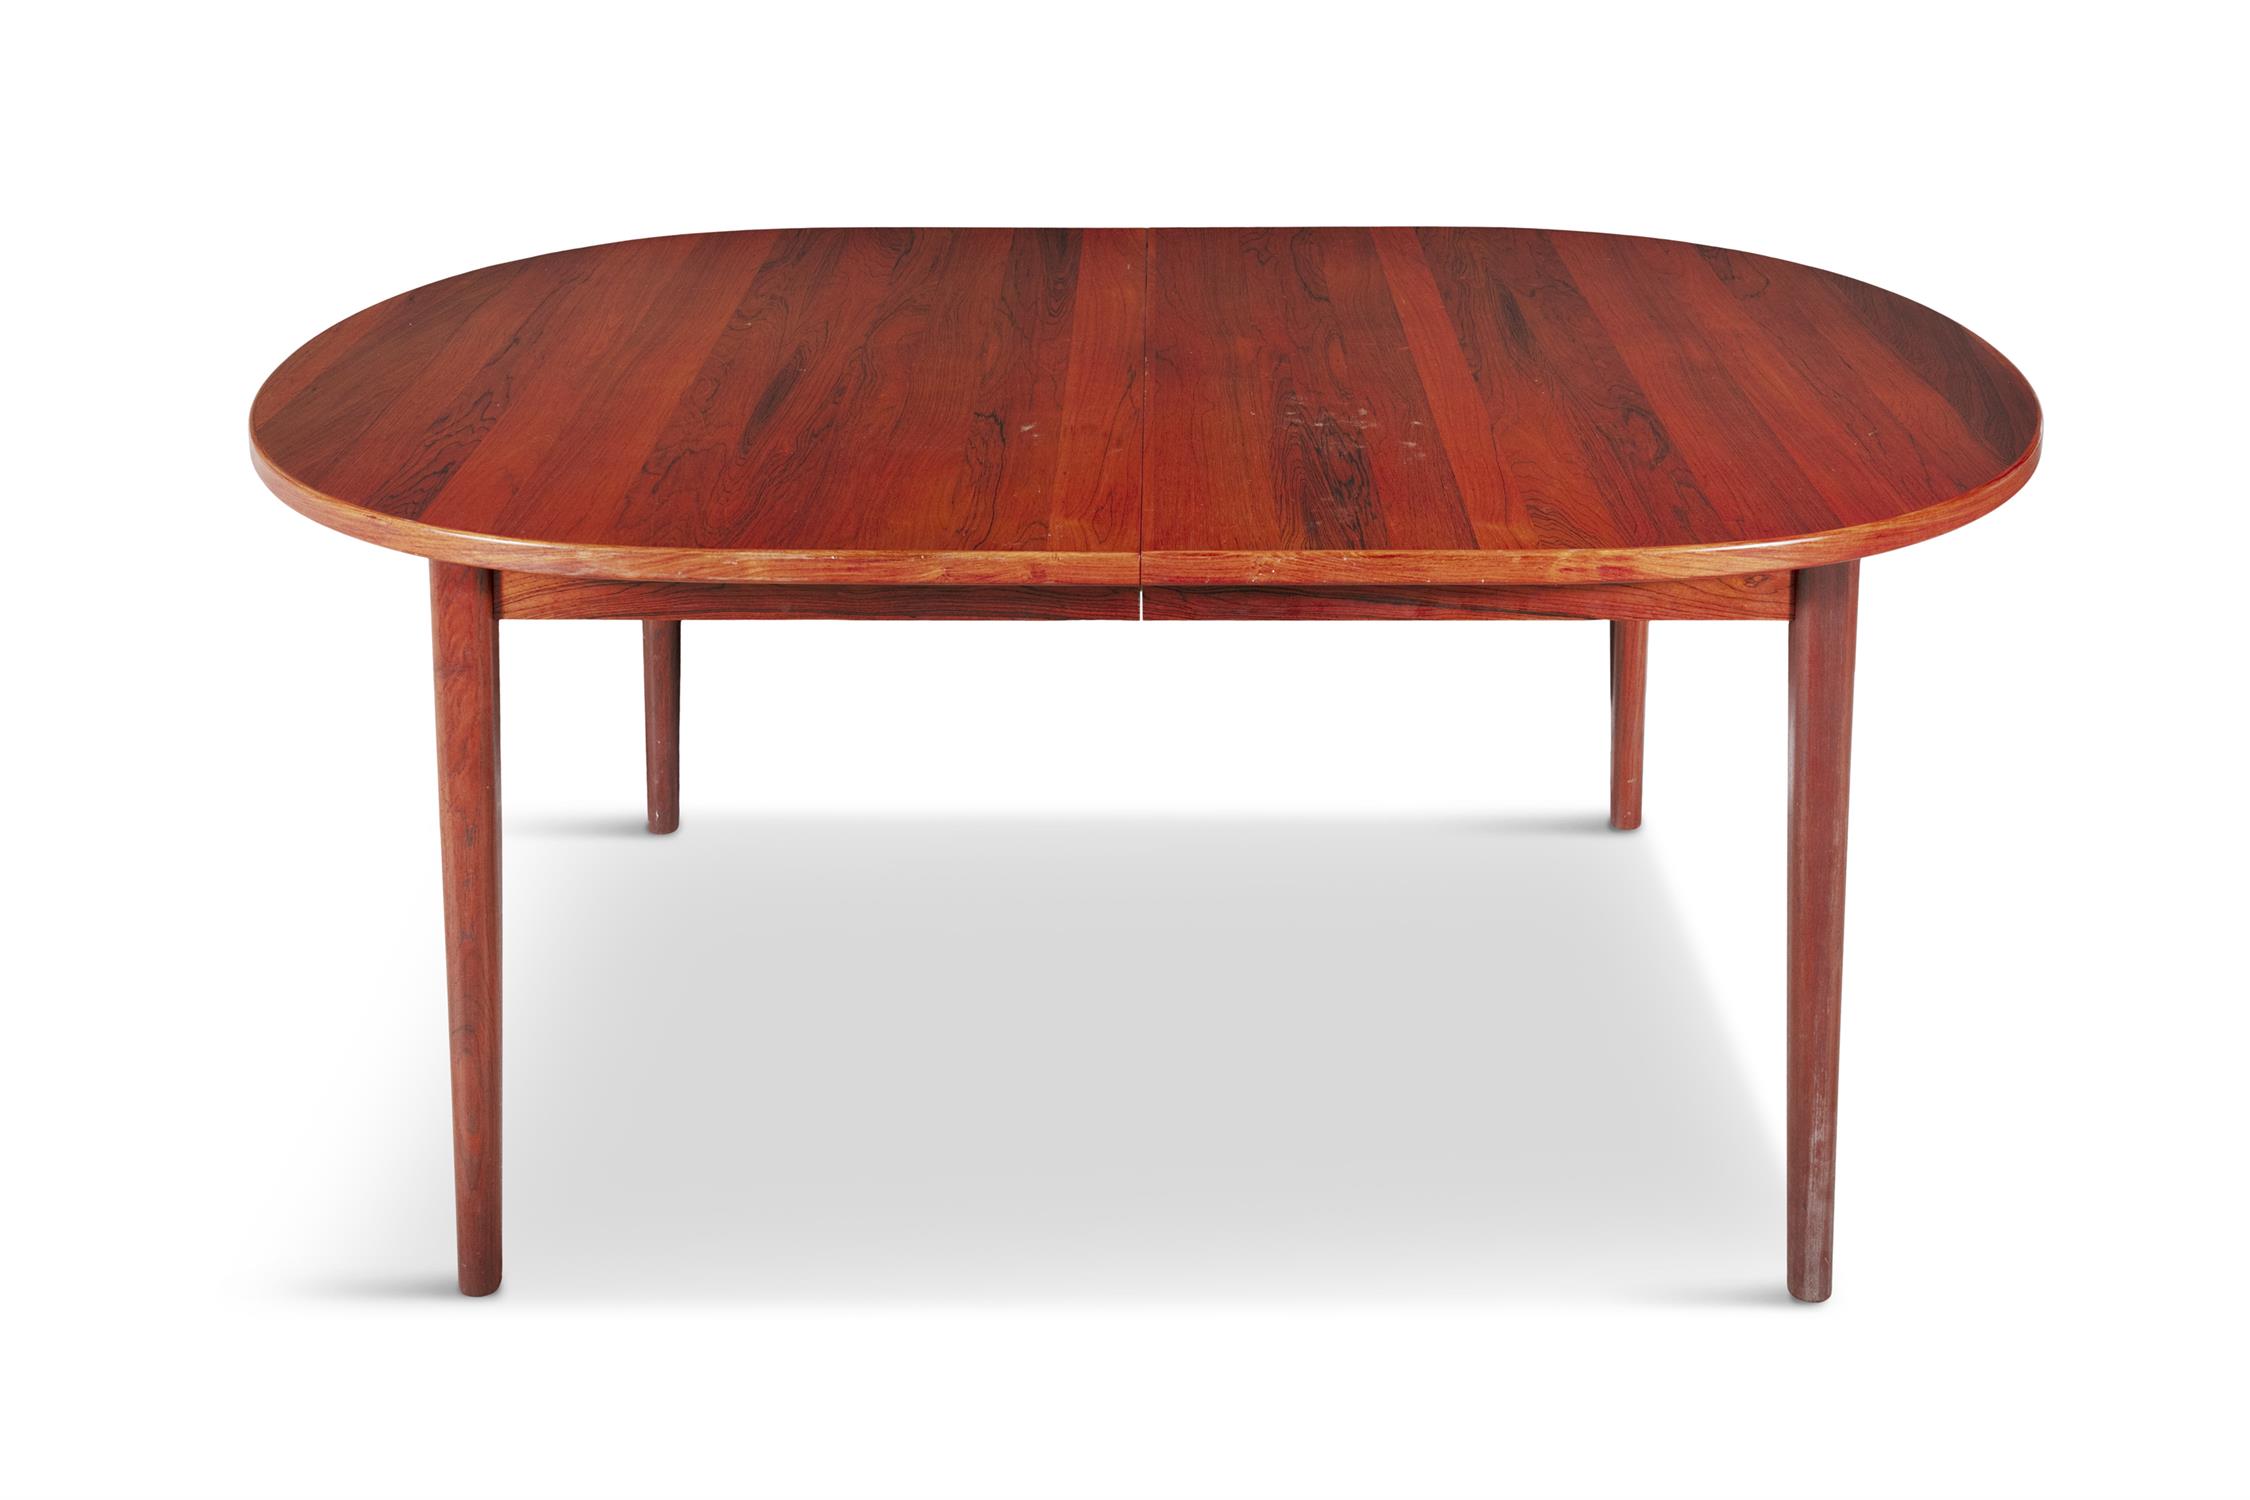 SAX A rosewood extending dining table, with 2 leaves. Denmark, c.1960. 101 x 155/210/265 x 75cm(h) - Image 3 of 5